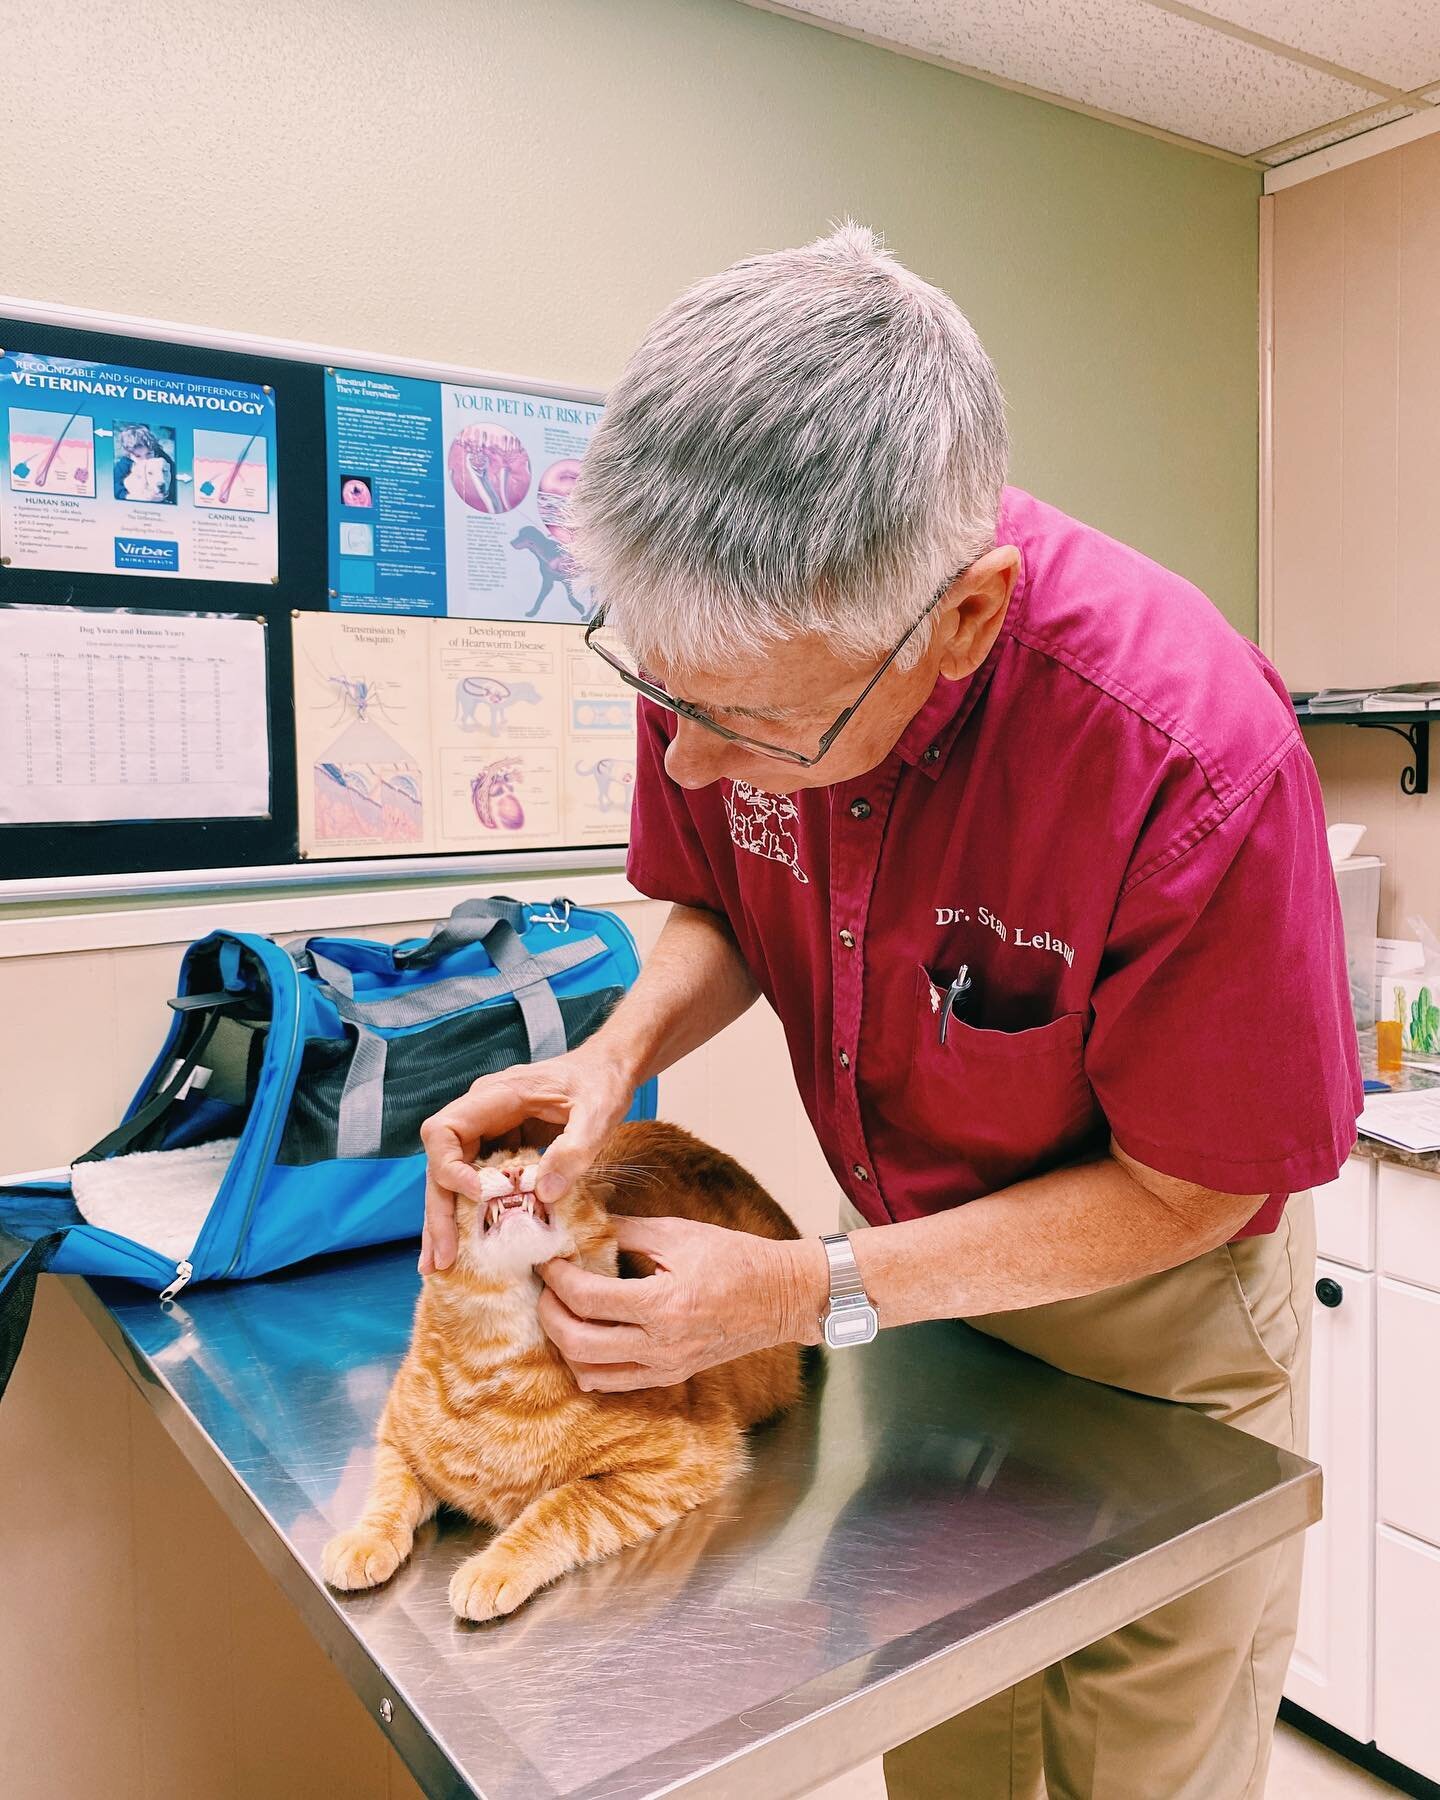 When a dog or cat comes in for their annual vaccinations, Dr. Leland performs a wellness check of their teeth, ears, eyes, skin, and heart as part of that visit. 

For a more detailed wellness check, we have lab work available to check internal funct